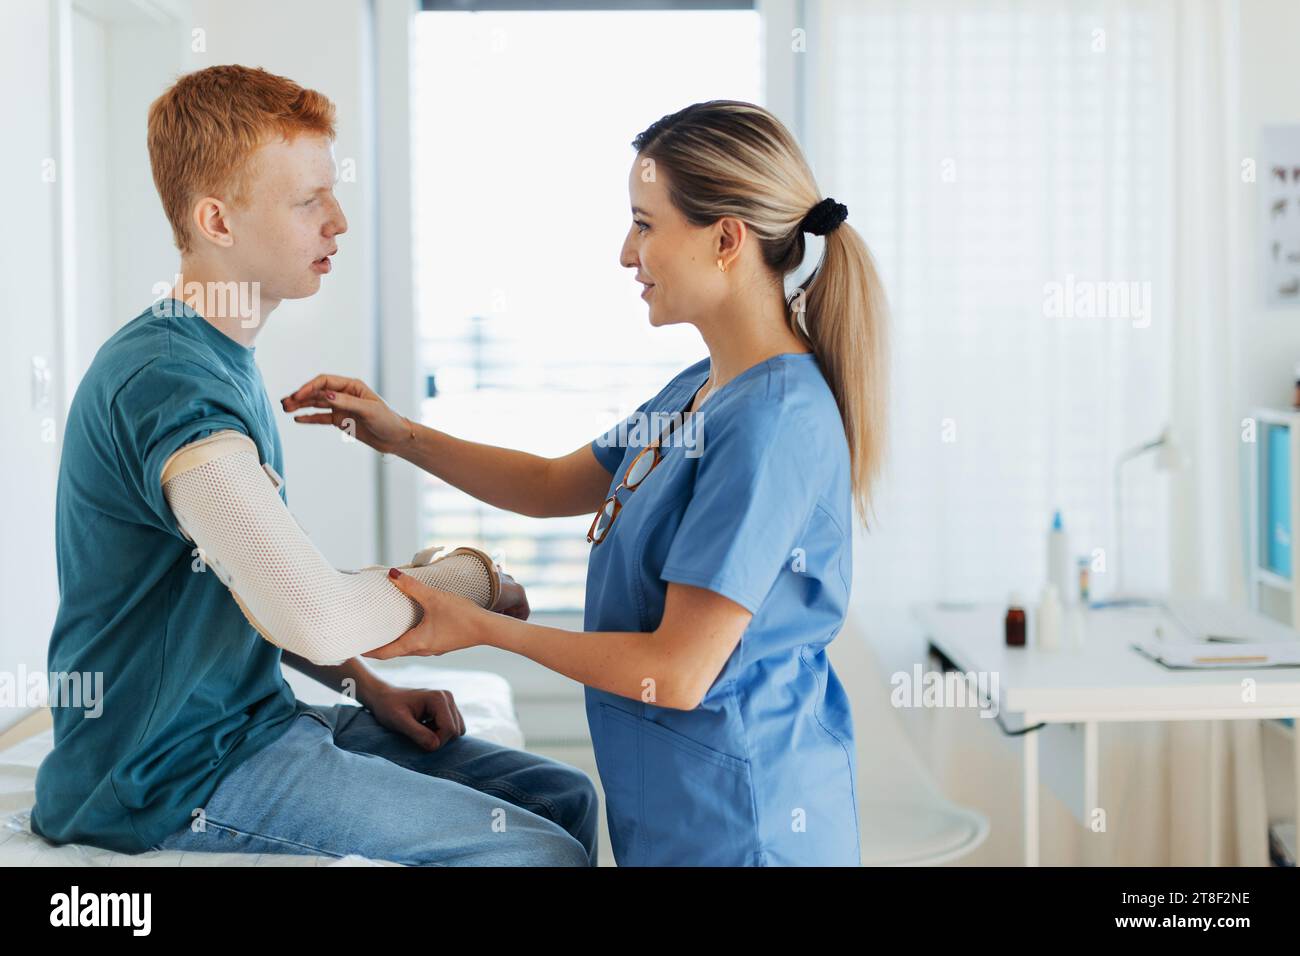 Doctor checking the orthopedic cast, brace on a teenage patient's broken arm. Teenage boy is healing a fracture after an accident. Stock Photo